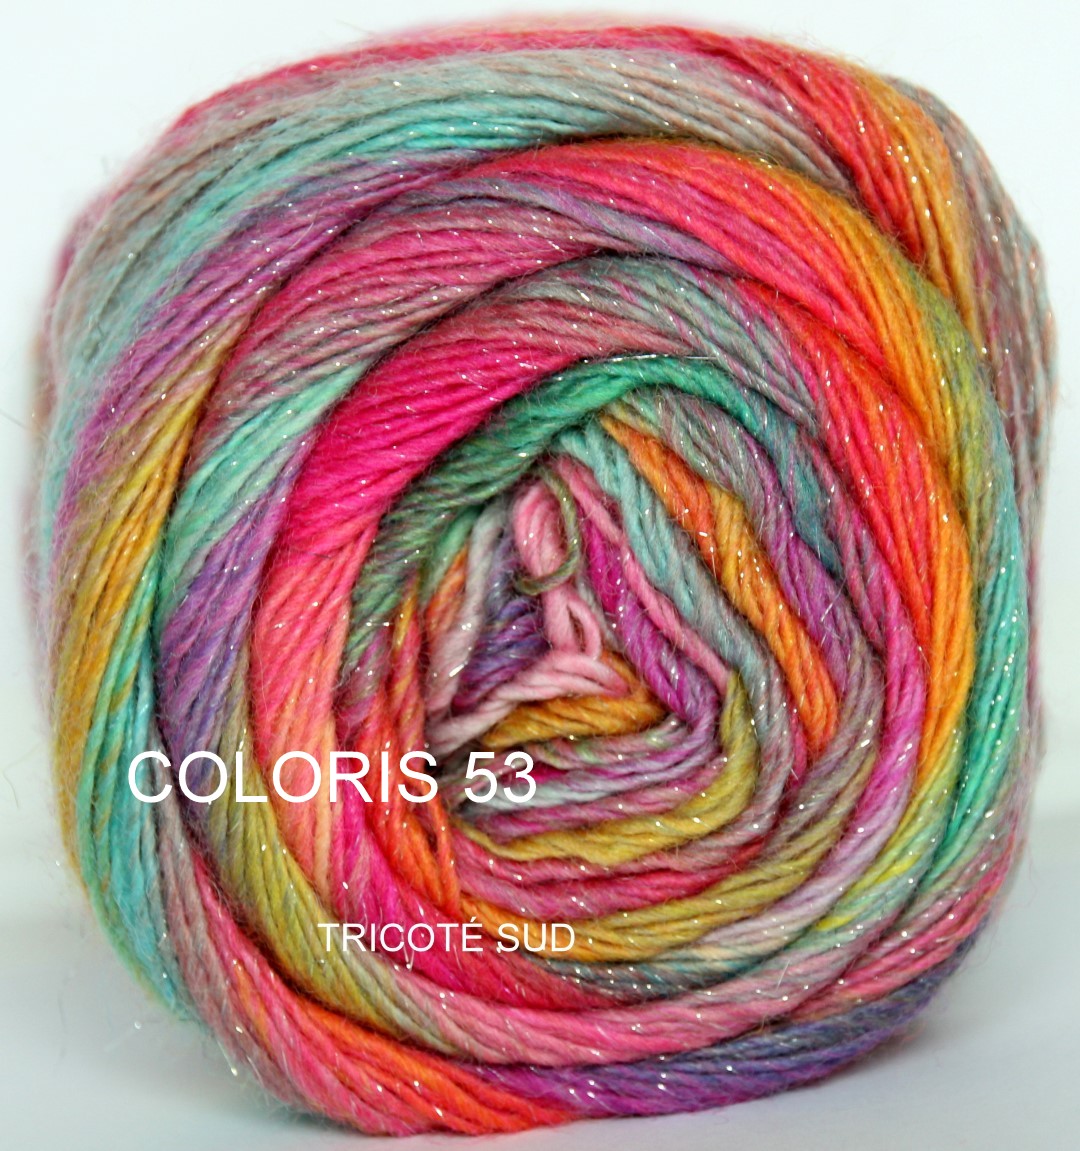 MILLE COLORI SOCKS AND LACE LUXE COLORIS 53 (2) (Large)